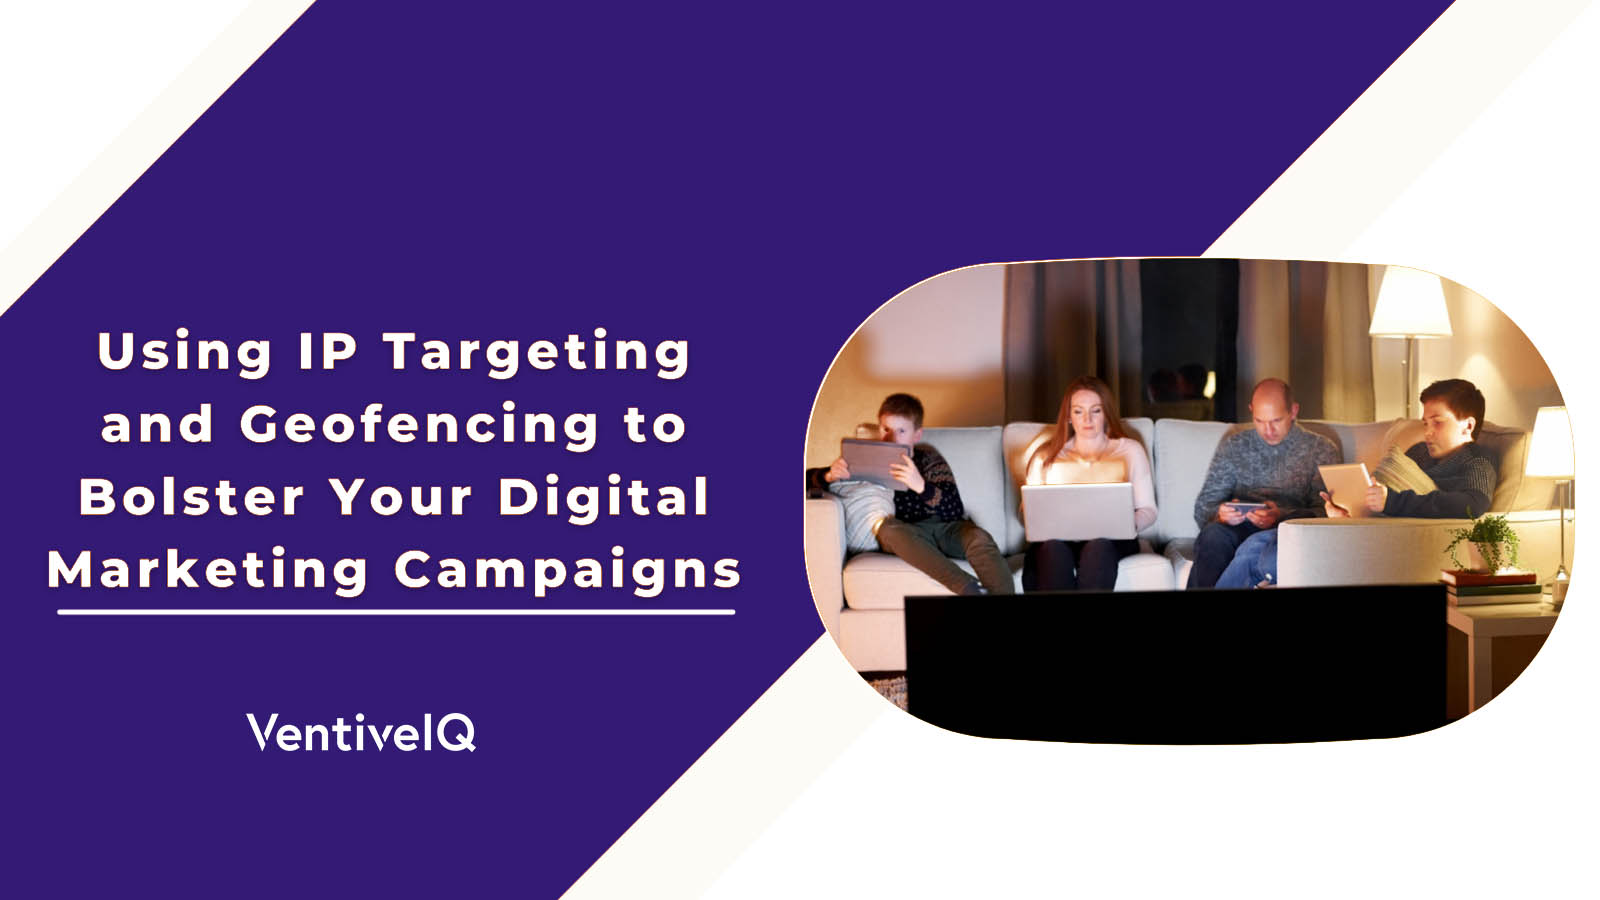 Using IP Targeting and Geofencing to Bolster Your Digital Marketing Campaigns